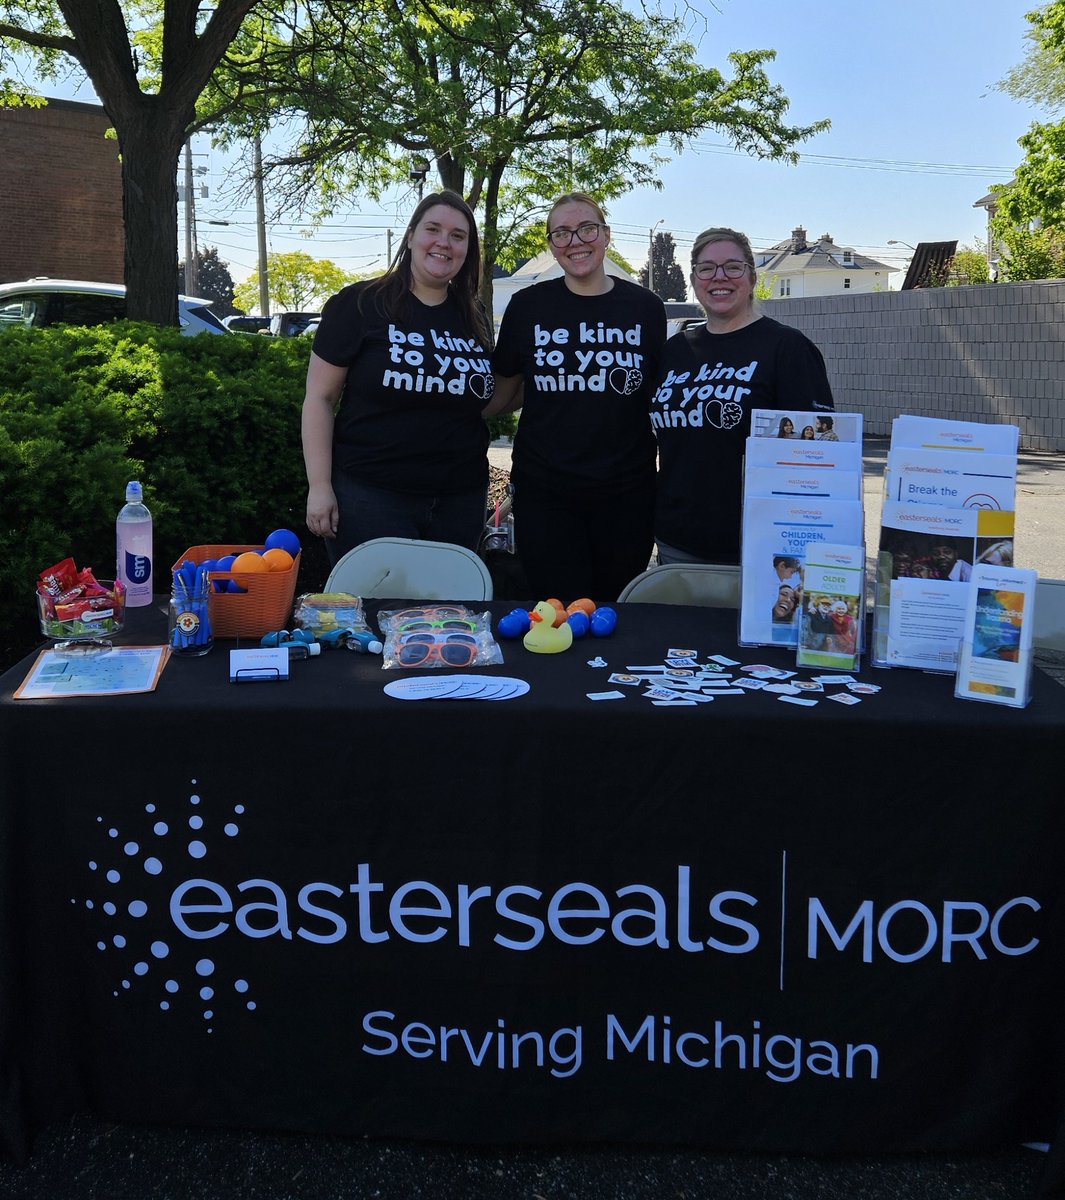 Our devoted team from our Center Line location had the opportunity to contribute to the Homeless Outreach Partnership Event, H.O.P.E, organized by Salvation Army in Mt. Clemens. We are so proud and thankful to be able to provide tools and resources for those in need.